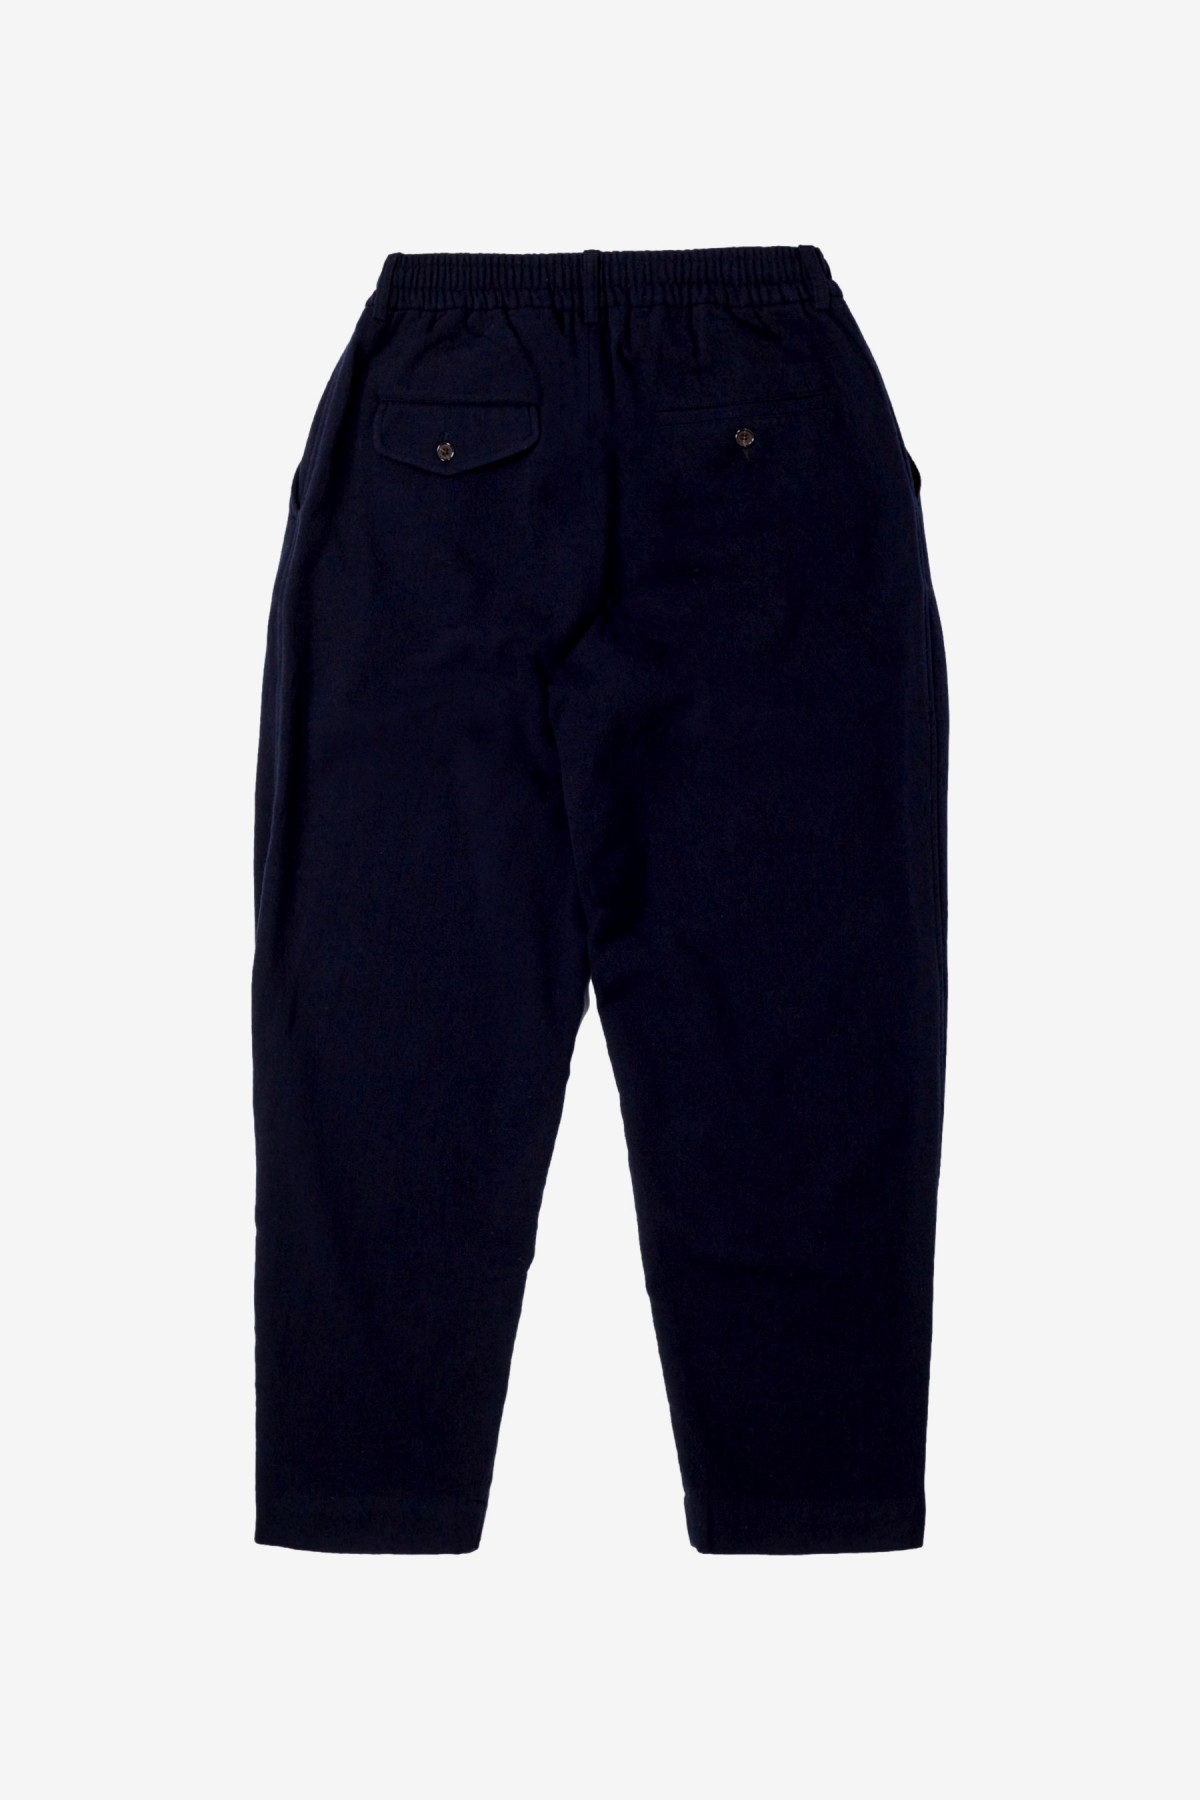 Universal Works Pleated Track Pant in Navy